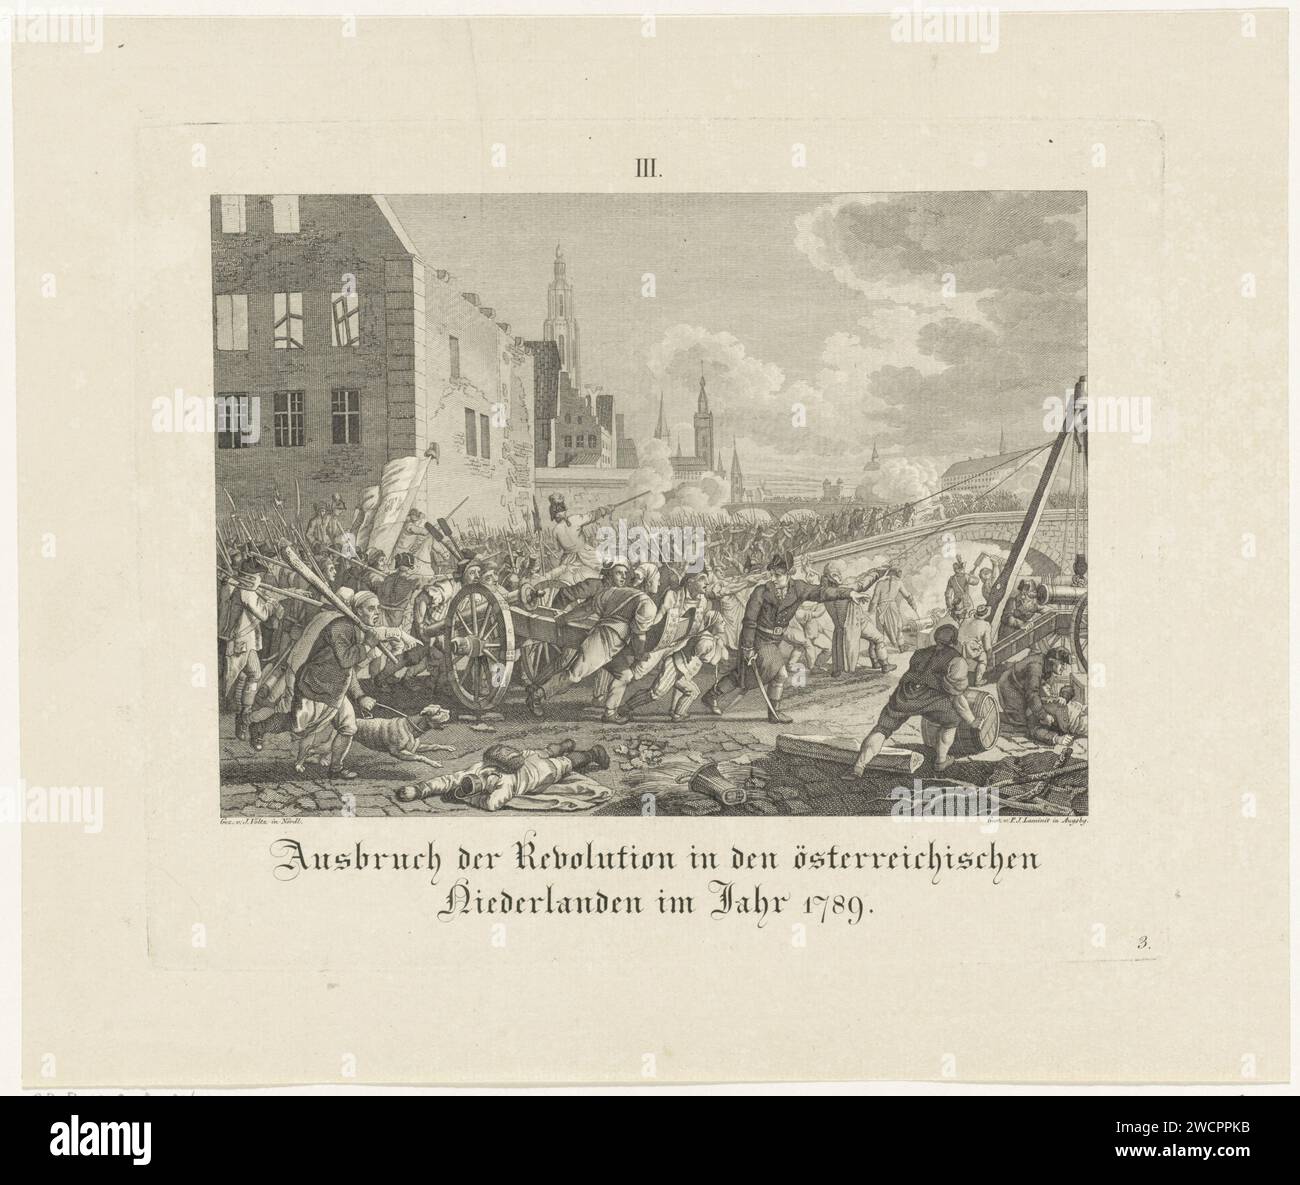 Outbreak of the uprising in Brabant against Austrian authority, 1789, Paul Jacob Laminit, after Johann Michael Voltz, 1800 - 1806 print Outbreak of the uprising in Brabant against the Austrian authority of Emperor Joseph II in 1789. Armed hordes of rebels shoot the streets. Numbered at the top: III and bottom right: 3. Print Maker: Augsburgafter Drawing by: Nördlingen paper etching / engraving street-fights, riots Southern Netherlands Stock Photo